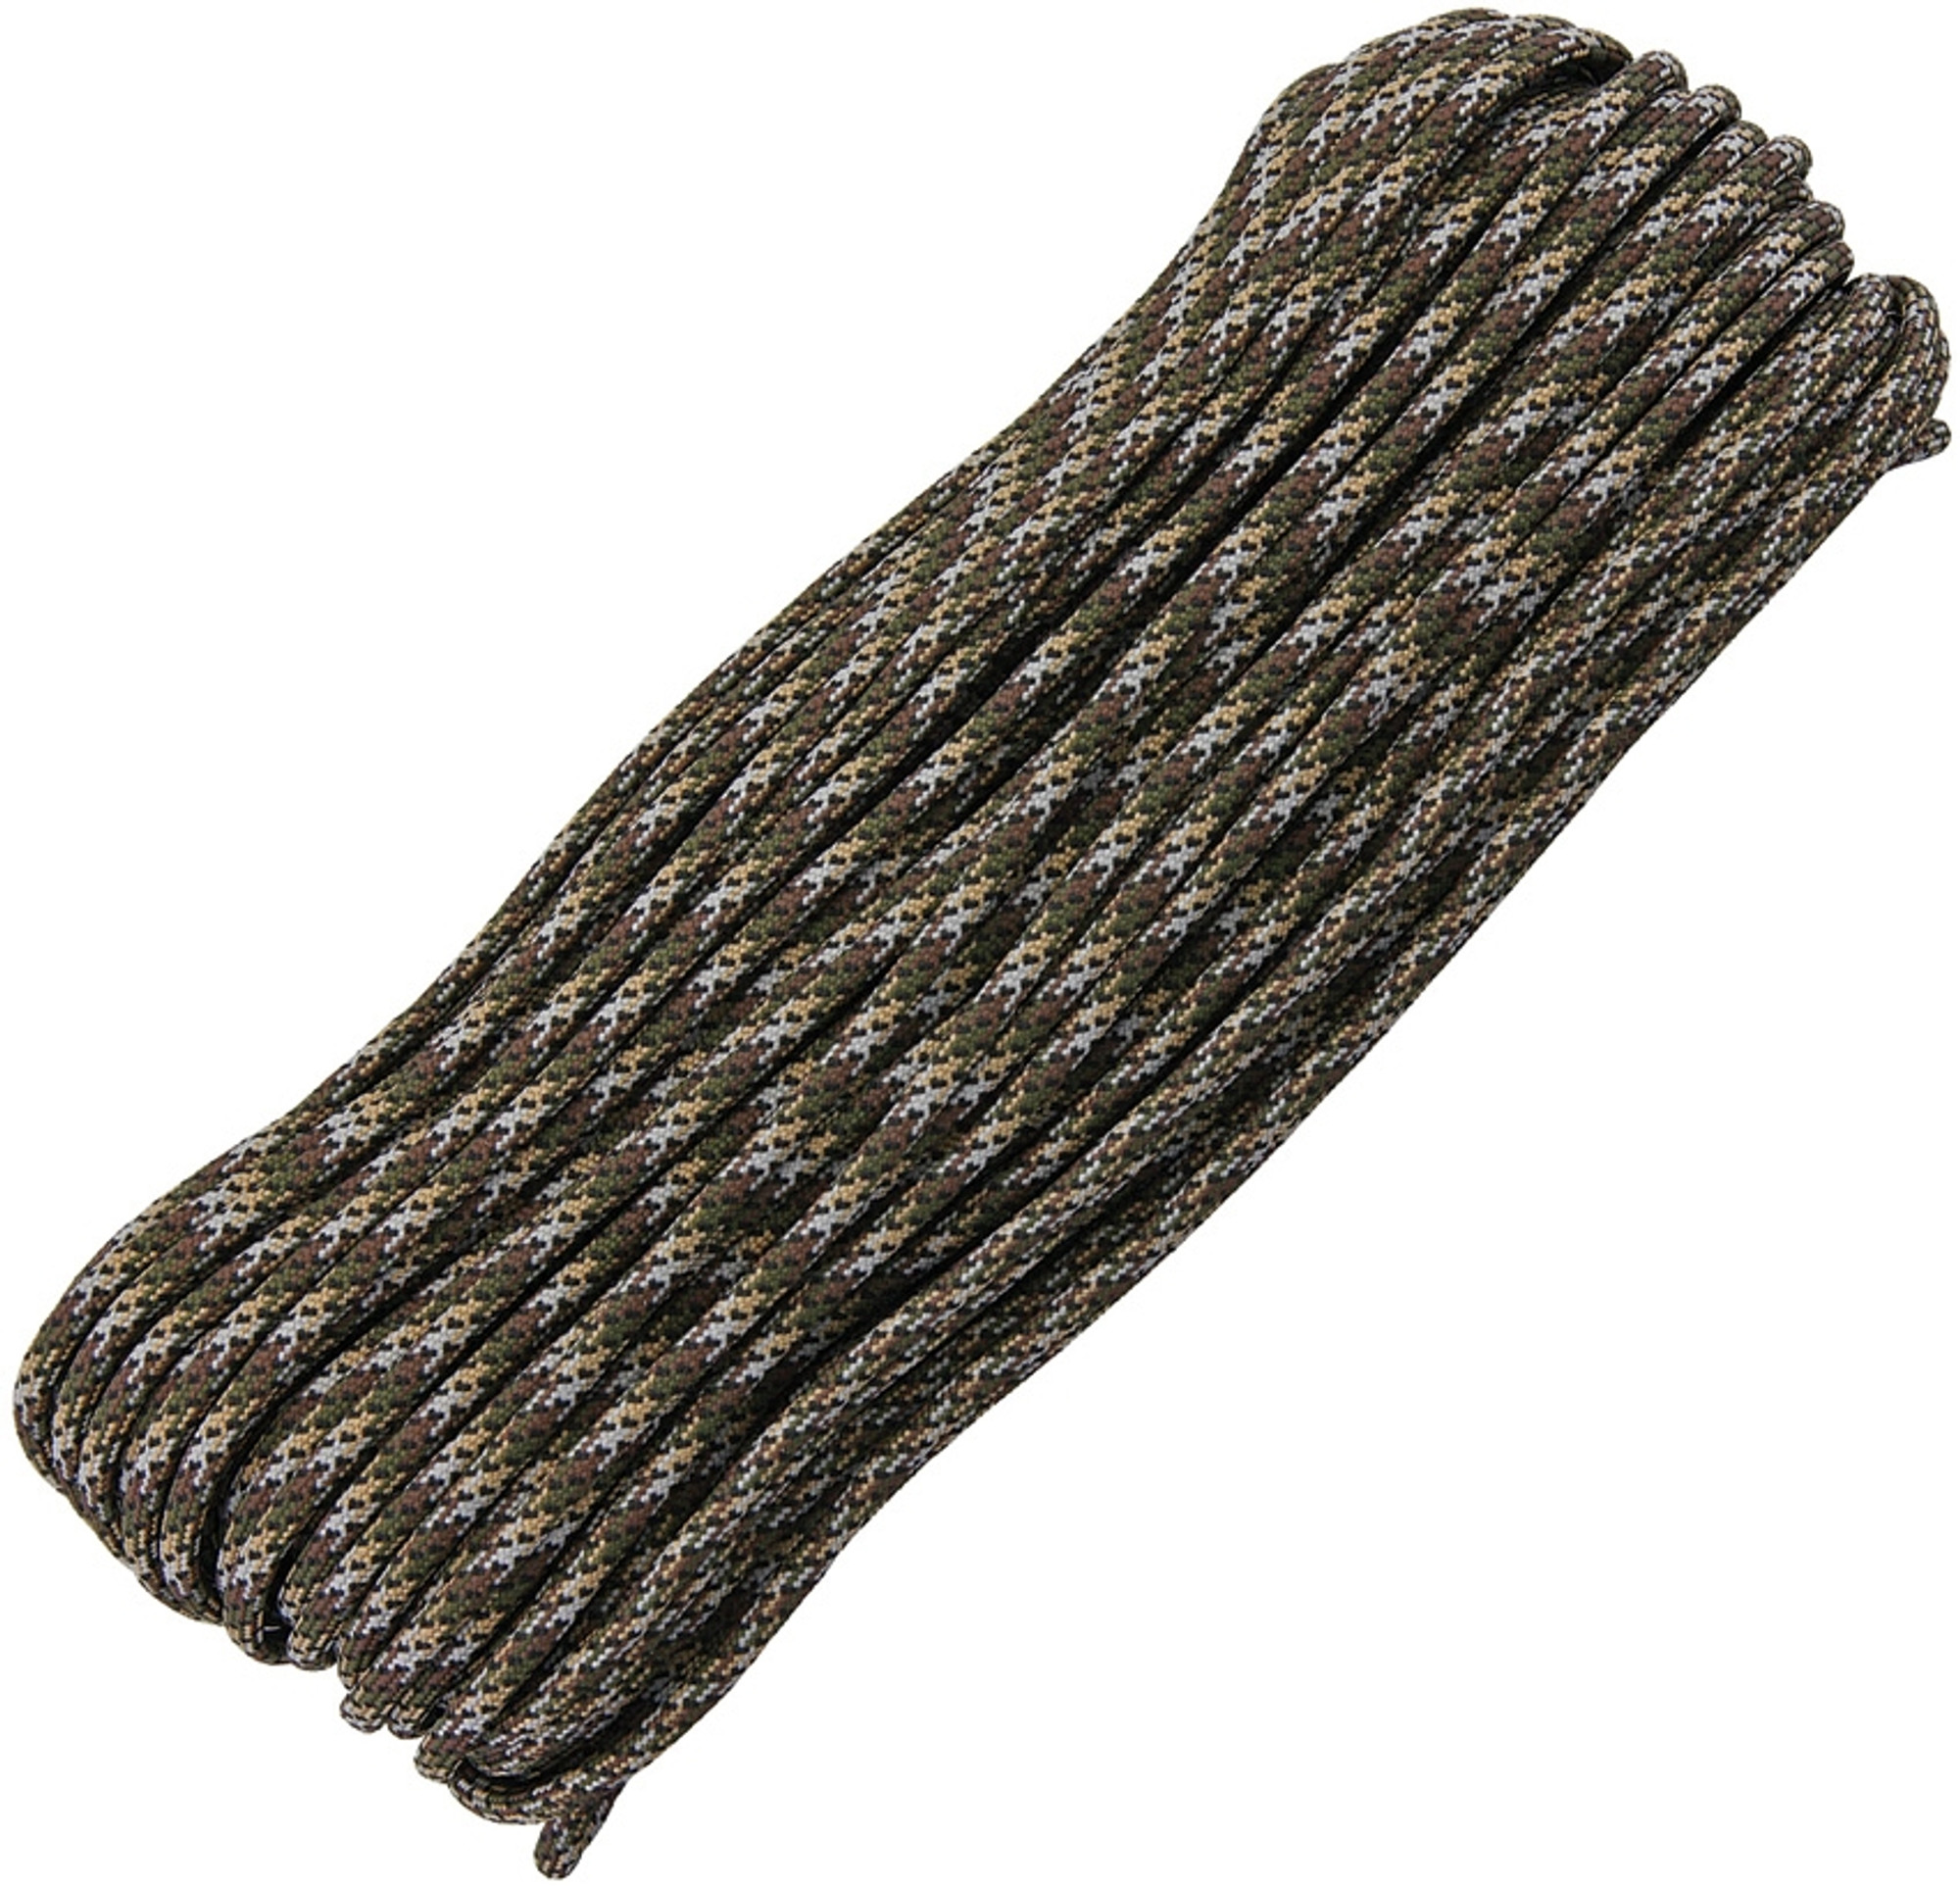 Parachute Cord Infiltrate